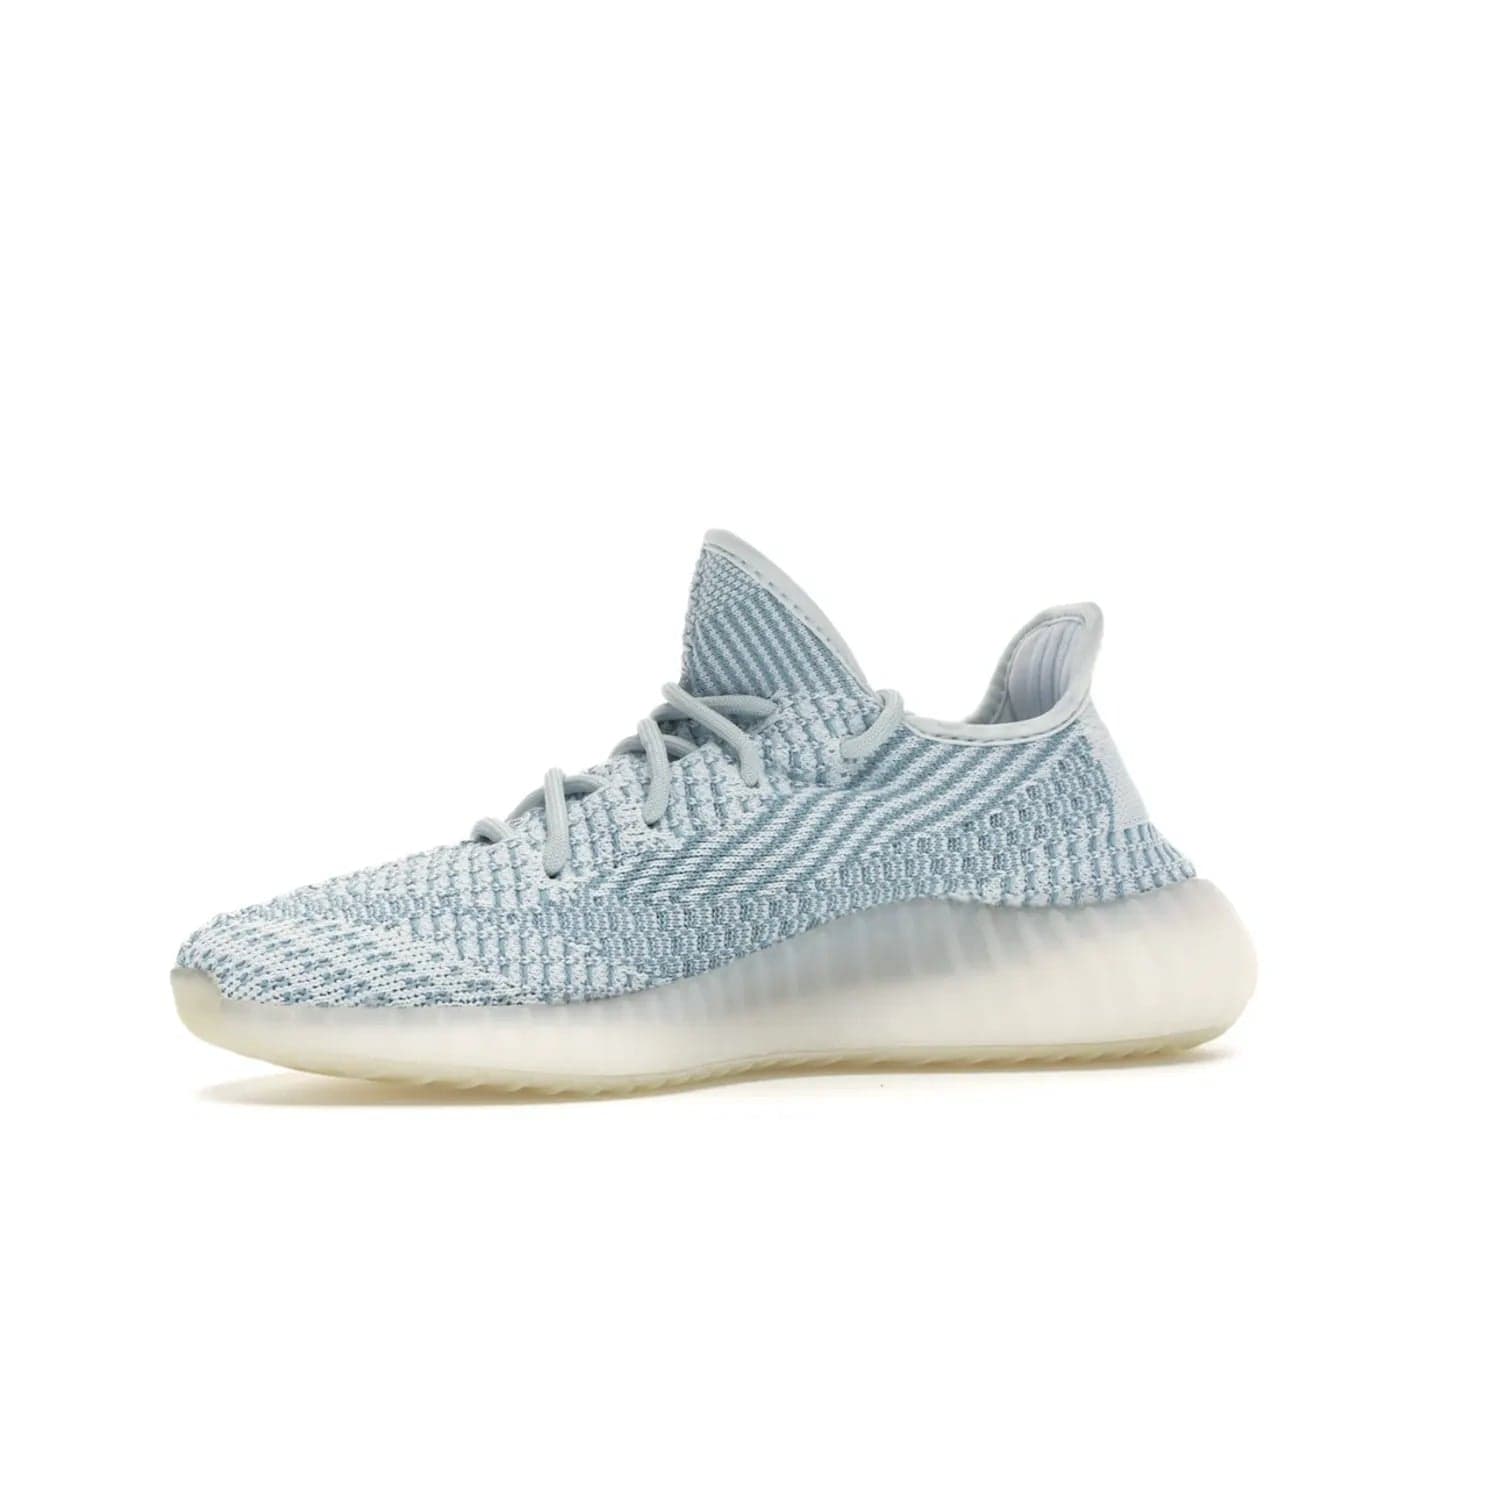 adidas Yeezy Boost 350 V2 Cloud White (Non-Reflective) - Image 17 - Only at www.BallersClubKickz.com - Uniquely designed adidas Yeezy Boost 350 V2 Cloud White (Non-Reflective) with a Primeknit upper in shades of cream and blue with a contrasting hard sole. A fashion-forward sneaker with a transparent strip and blue-and-white patterns.